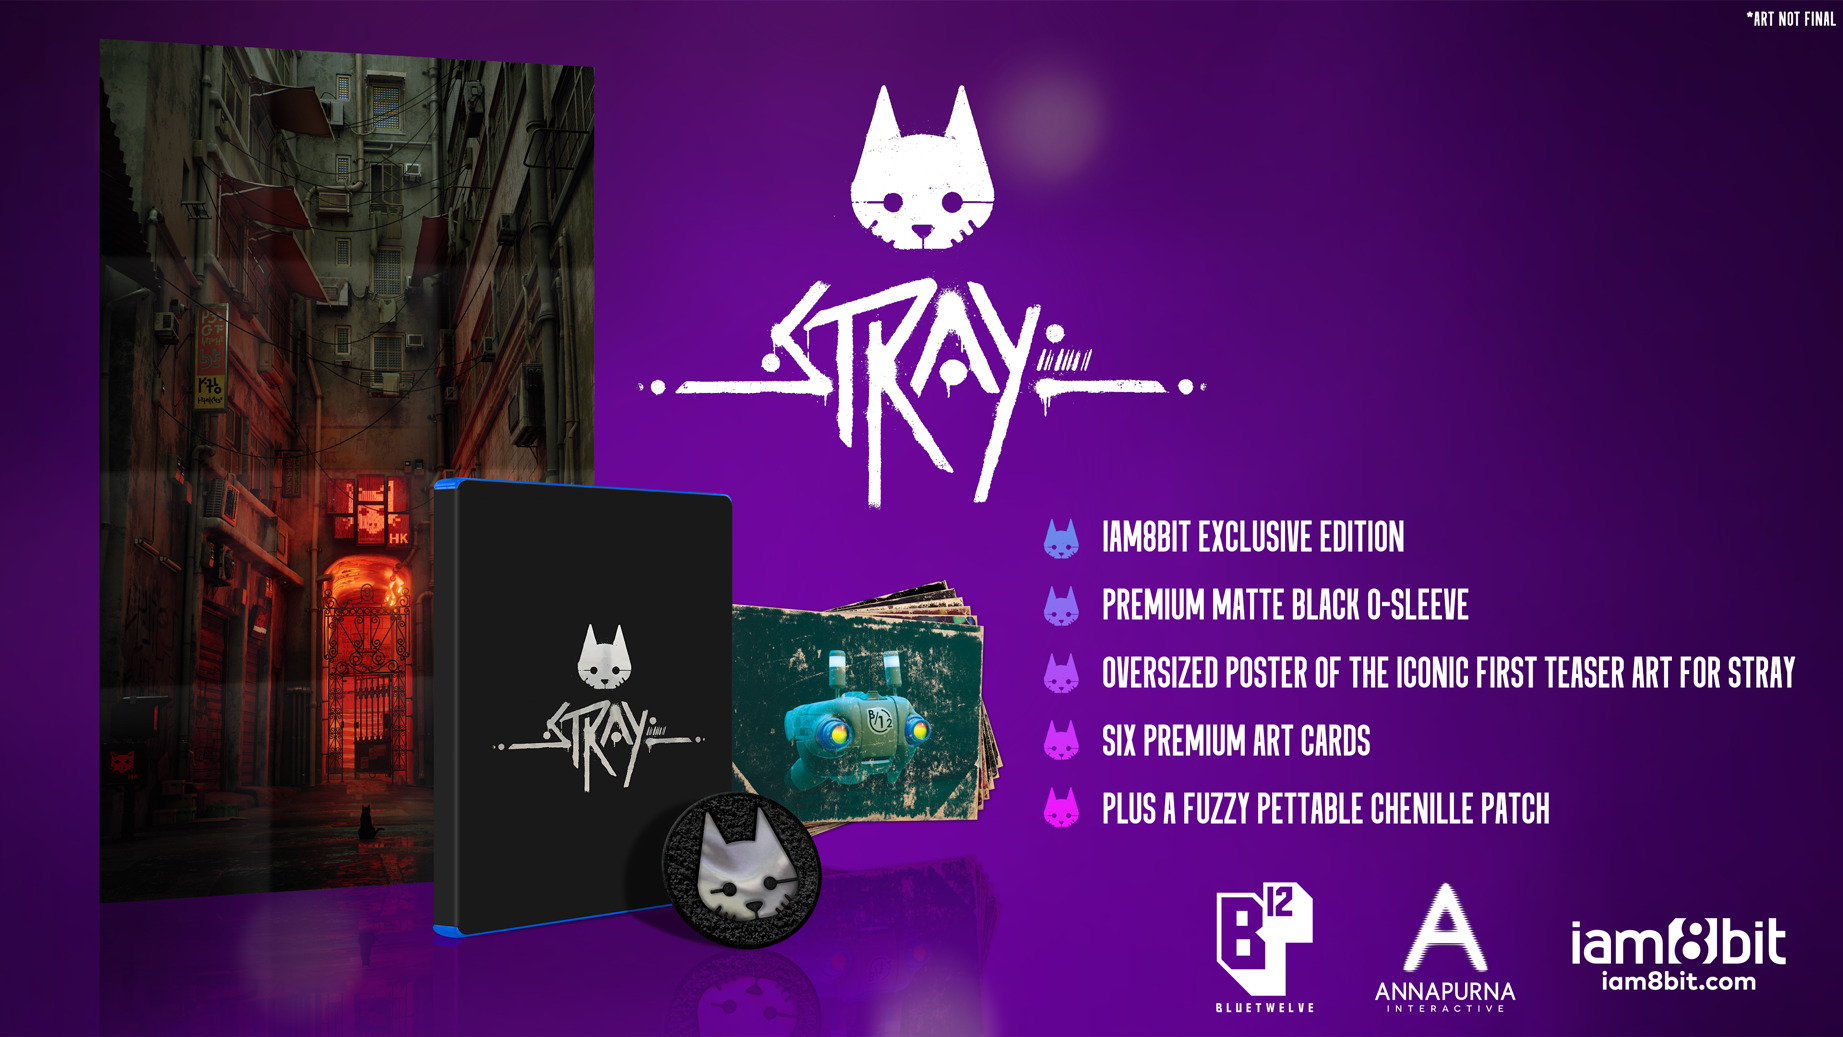 - launches September Gematsu PS5 STRAY 20 physical edition